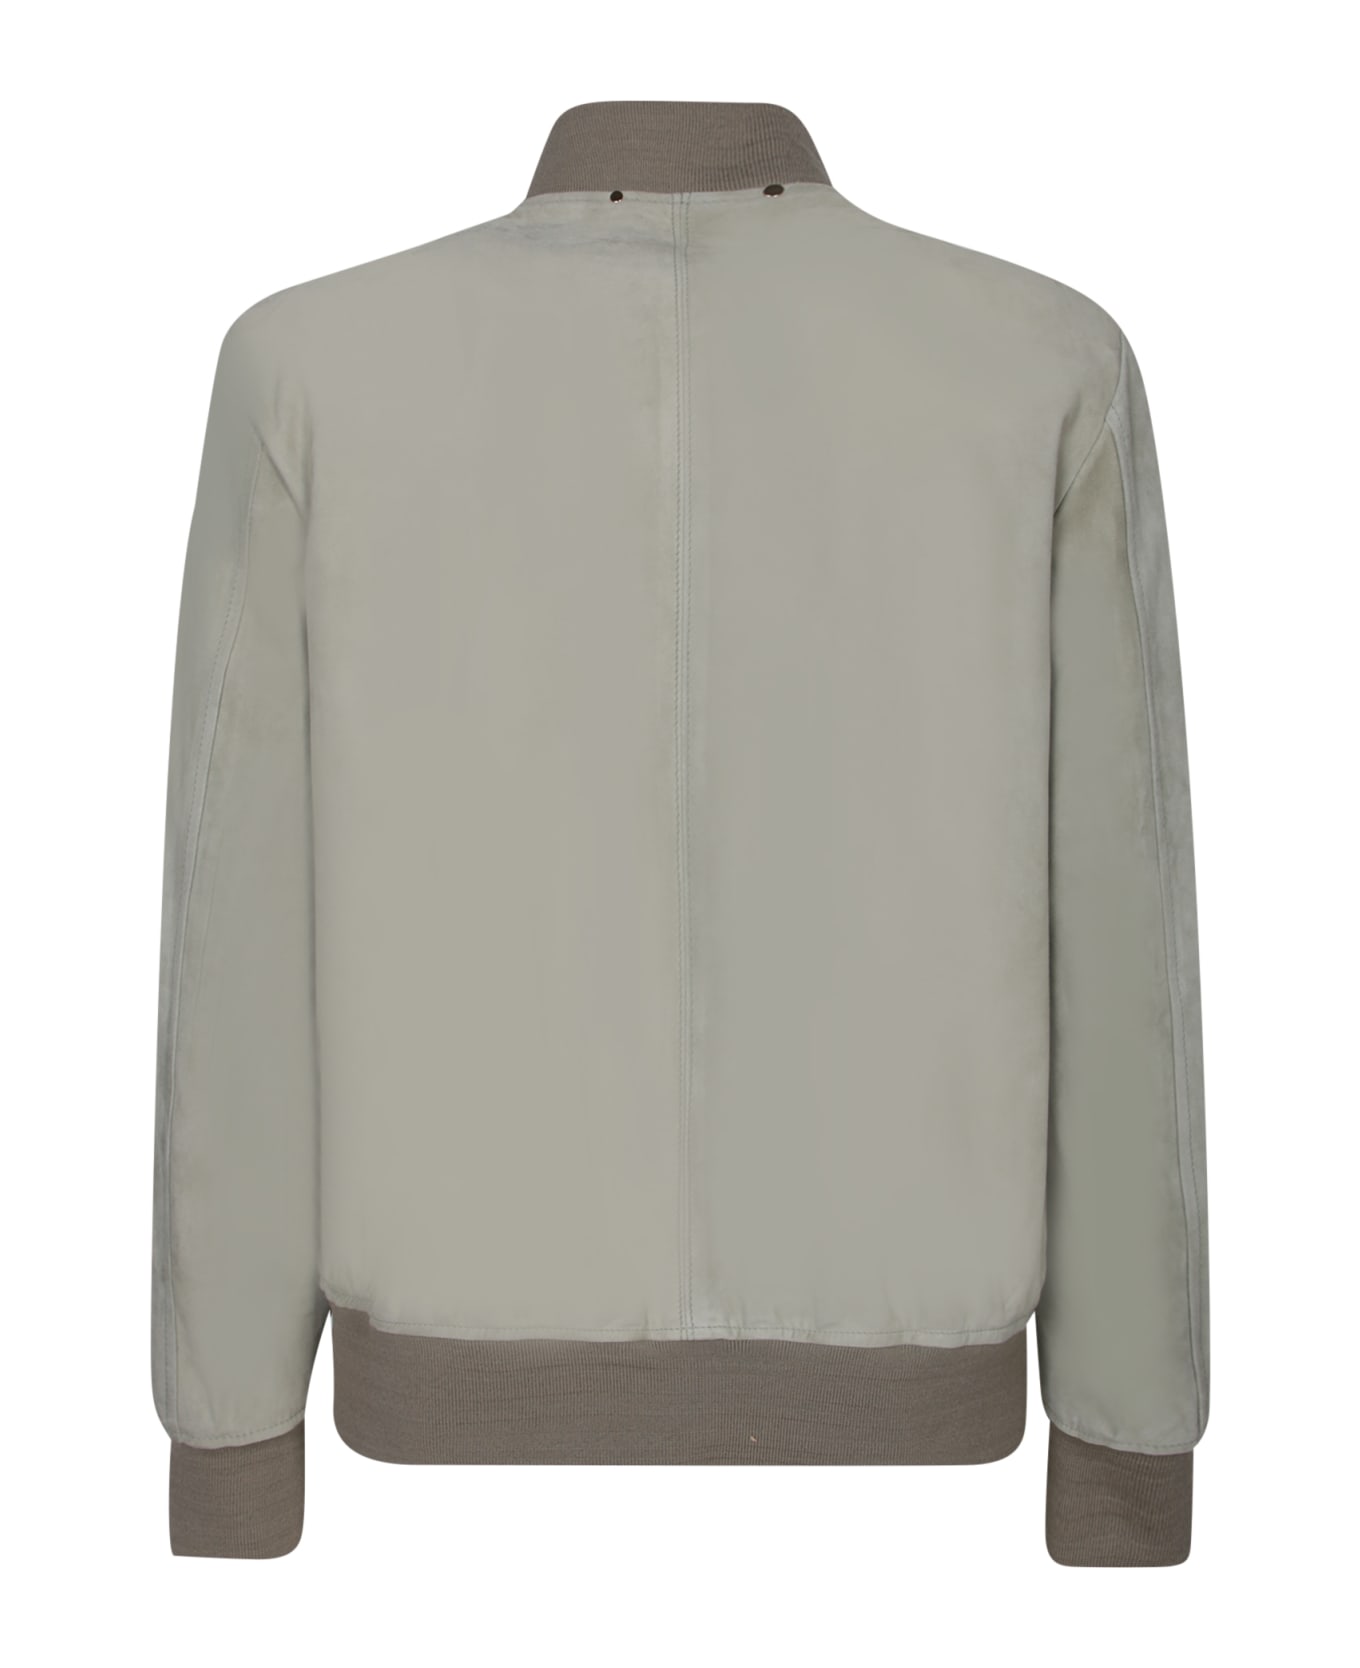 Paul Smith Suede Bomber Jacket - Green